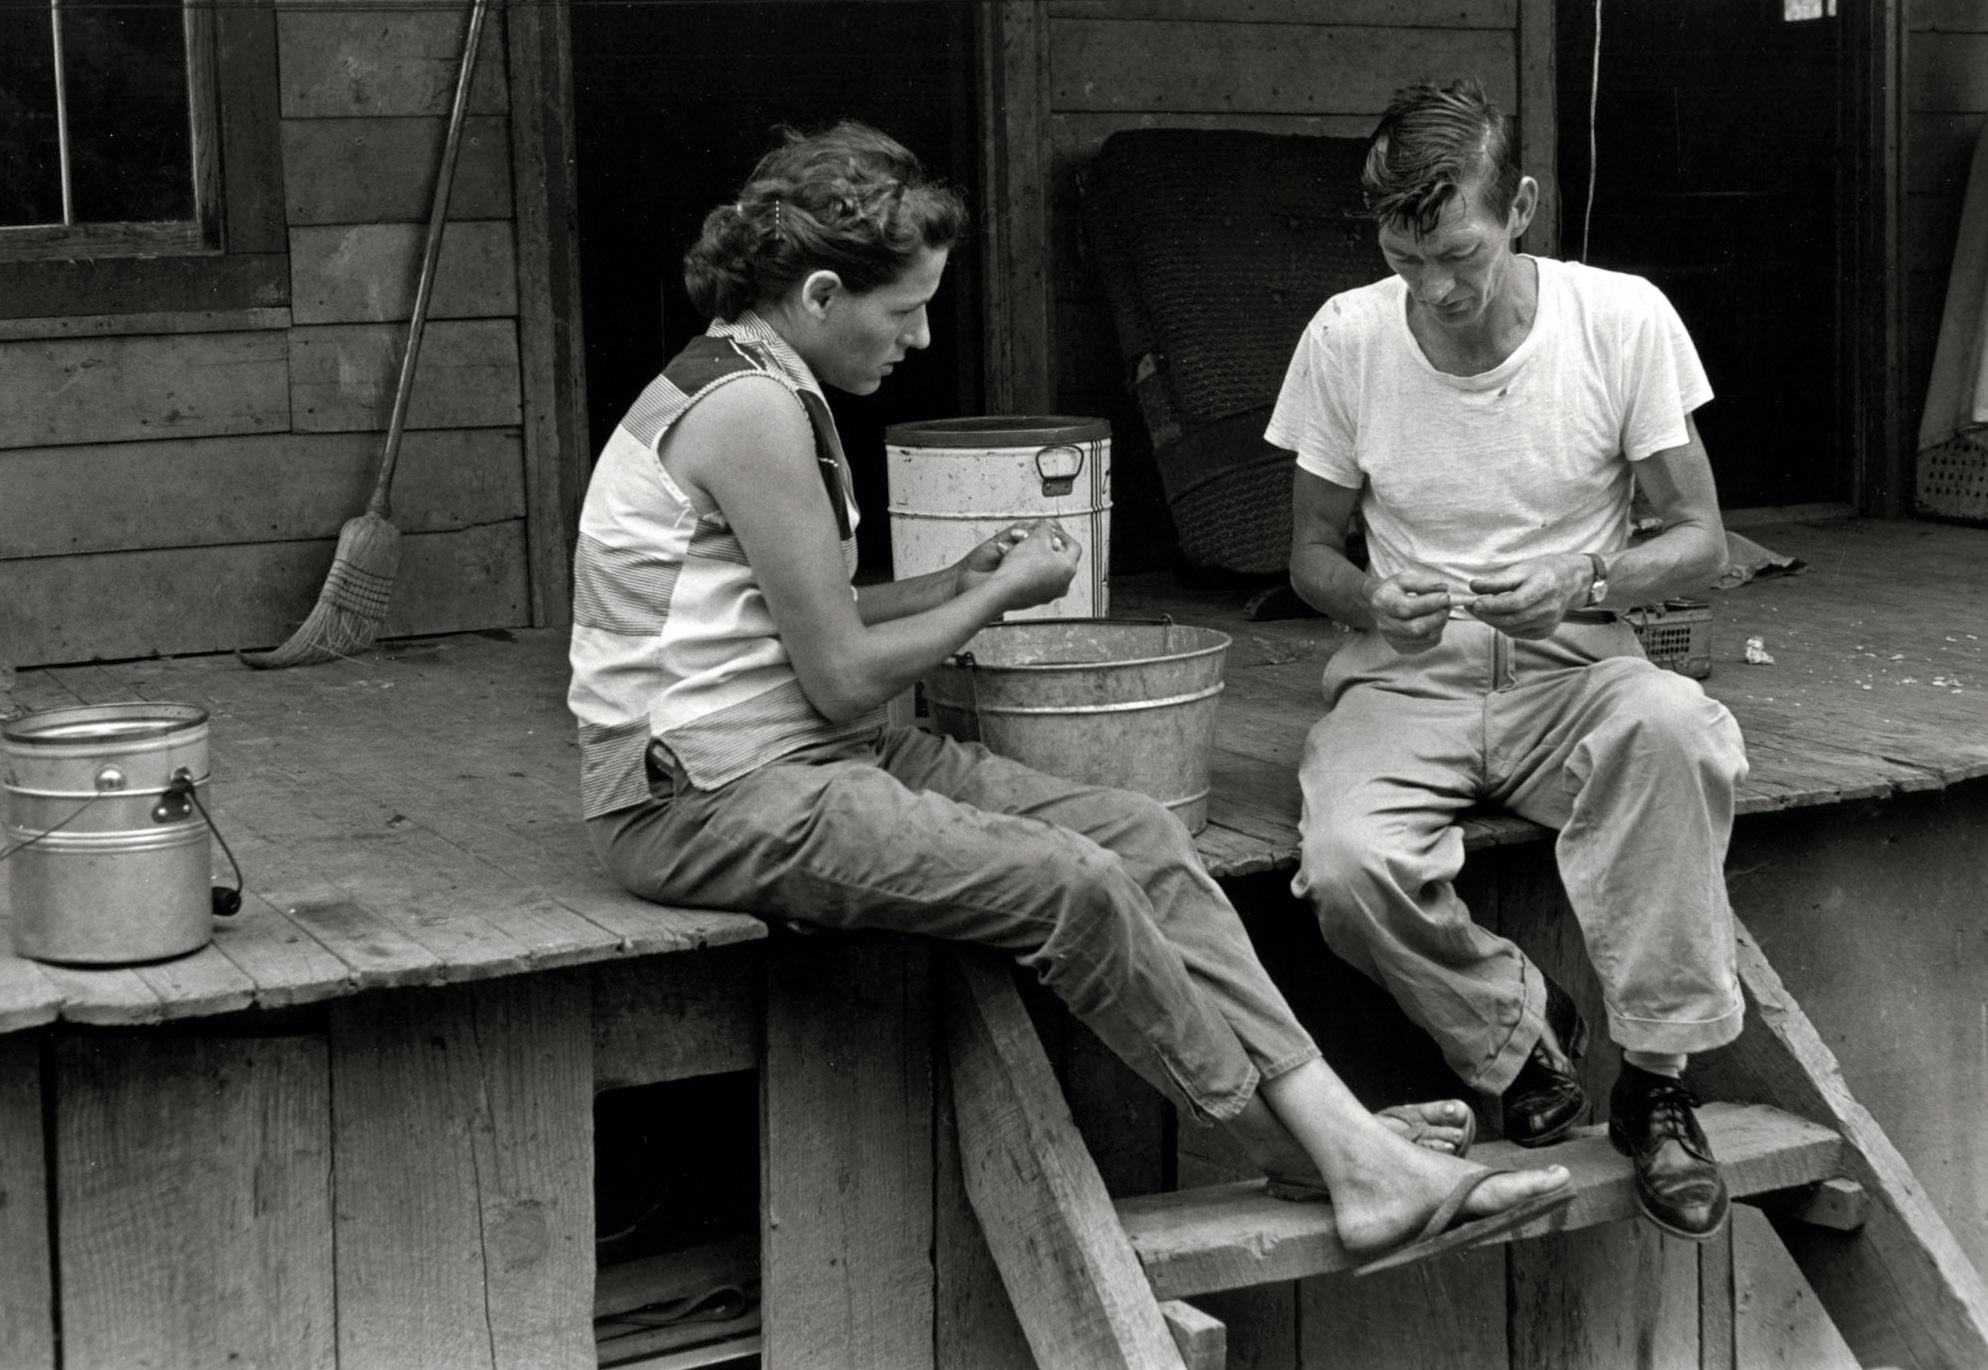 "Leatherwood, Kentucky, 1964. Willie and Vivian Cornett sitting on porch." Willie, a recently laid off coal miner, and wife Vivian had 12 children when William Gedney snapped this exposure on his first visit with the Cornett family. Gedney Photographs and Writings Collection, Duke University.  View full size.